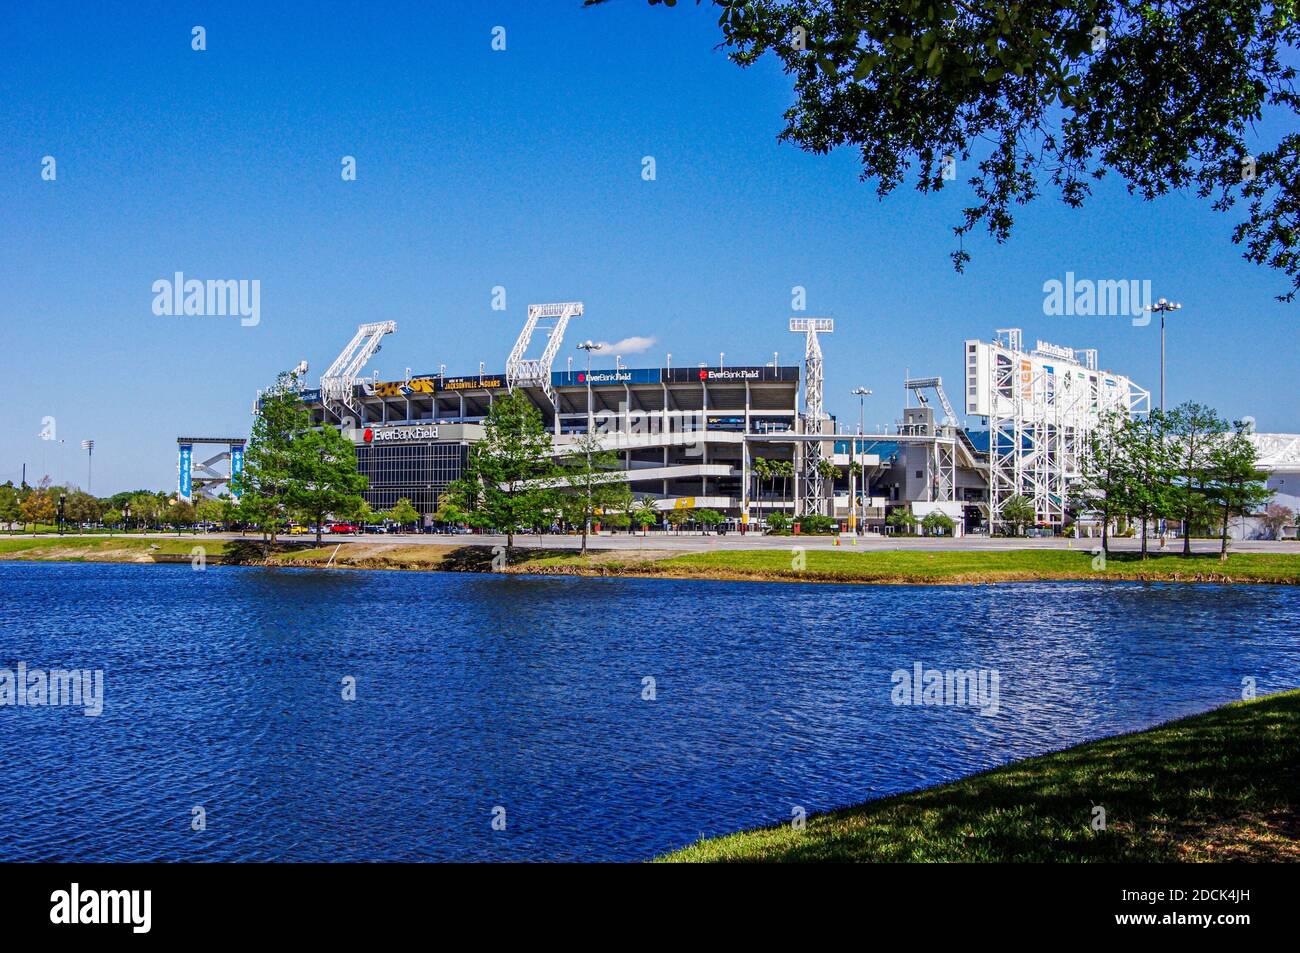 Jacksonville, FL--Mar 18, 2018; view of Everbank Field, home of the Jaguars NFL football team in downtown area with pond and landscape in foreground. Stock Photo